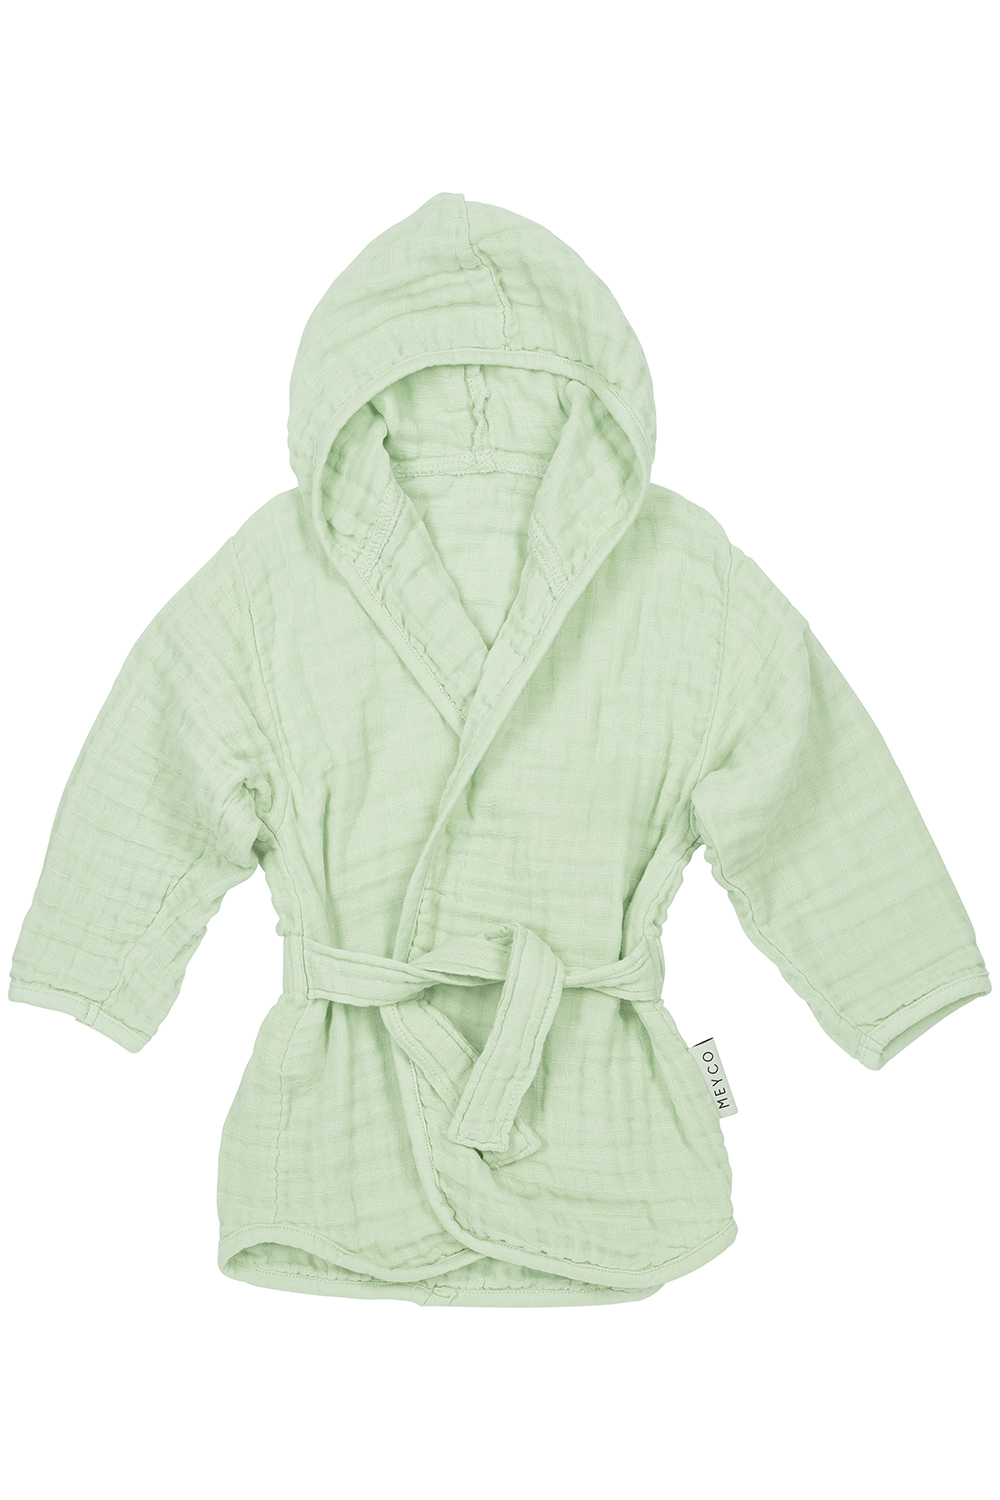 Bademantel pre-washed musselin Uni - soft green - 86/92